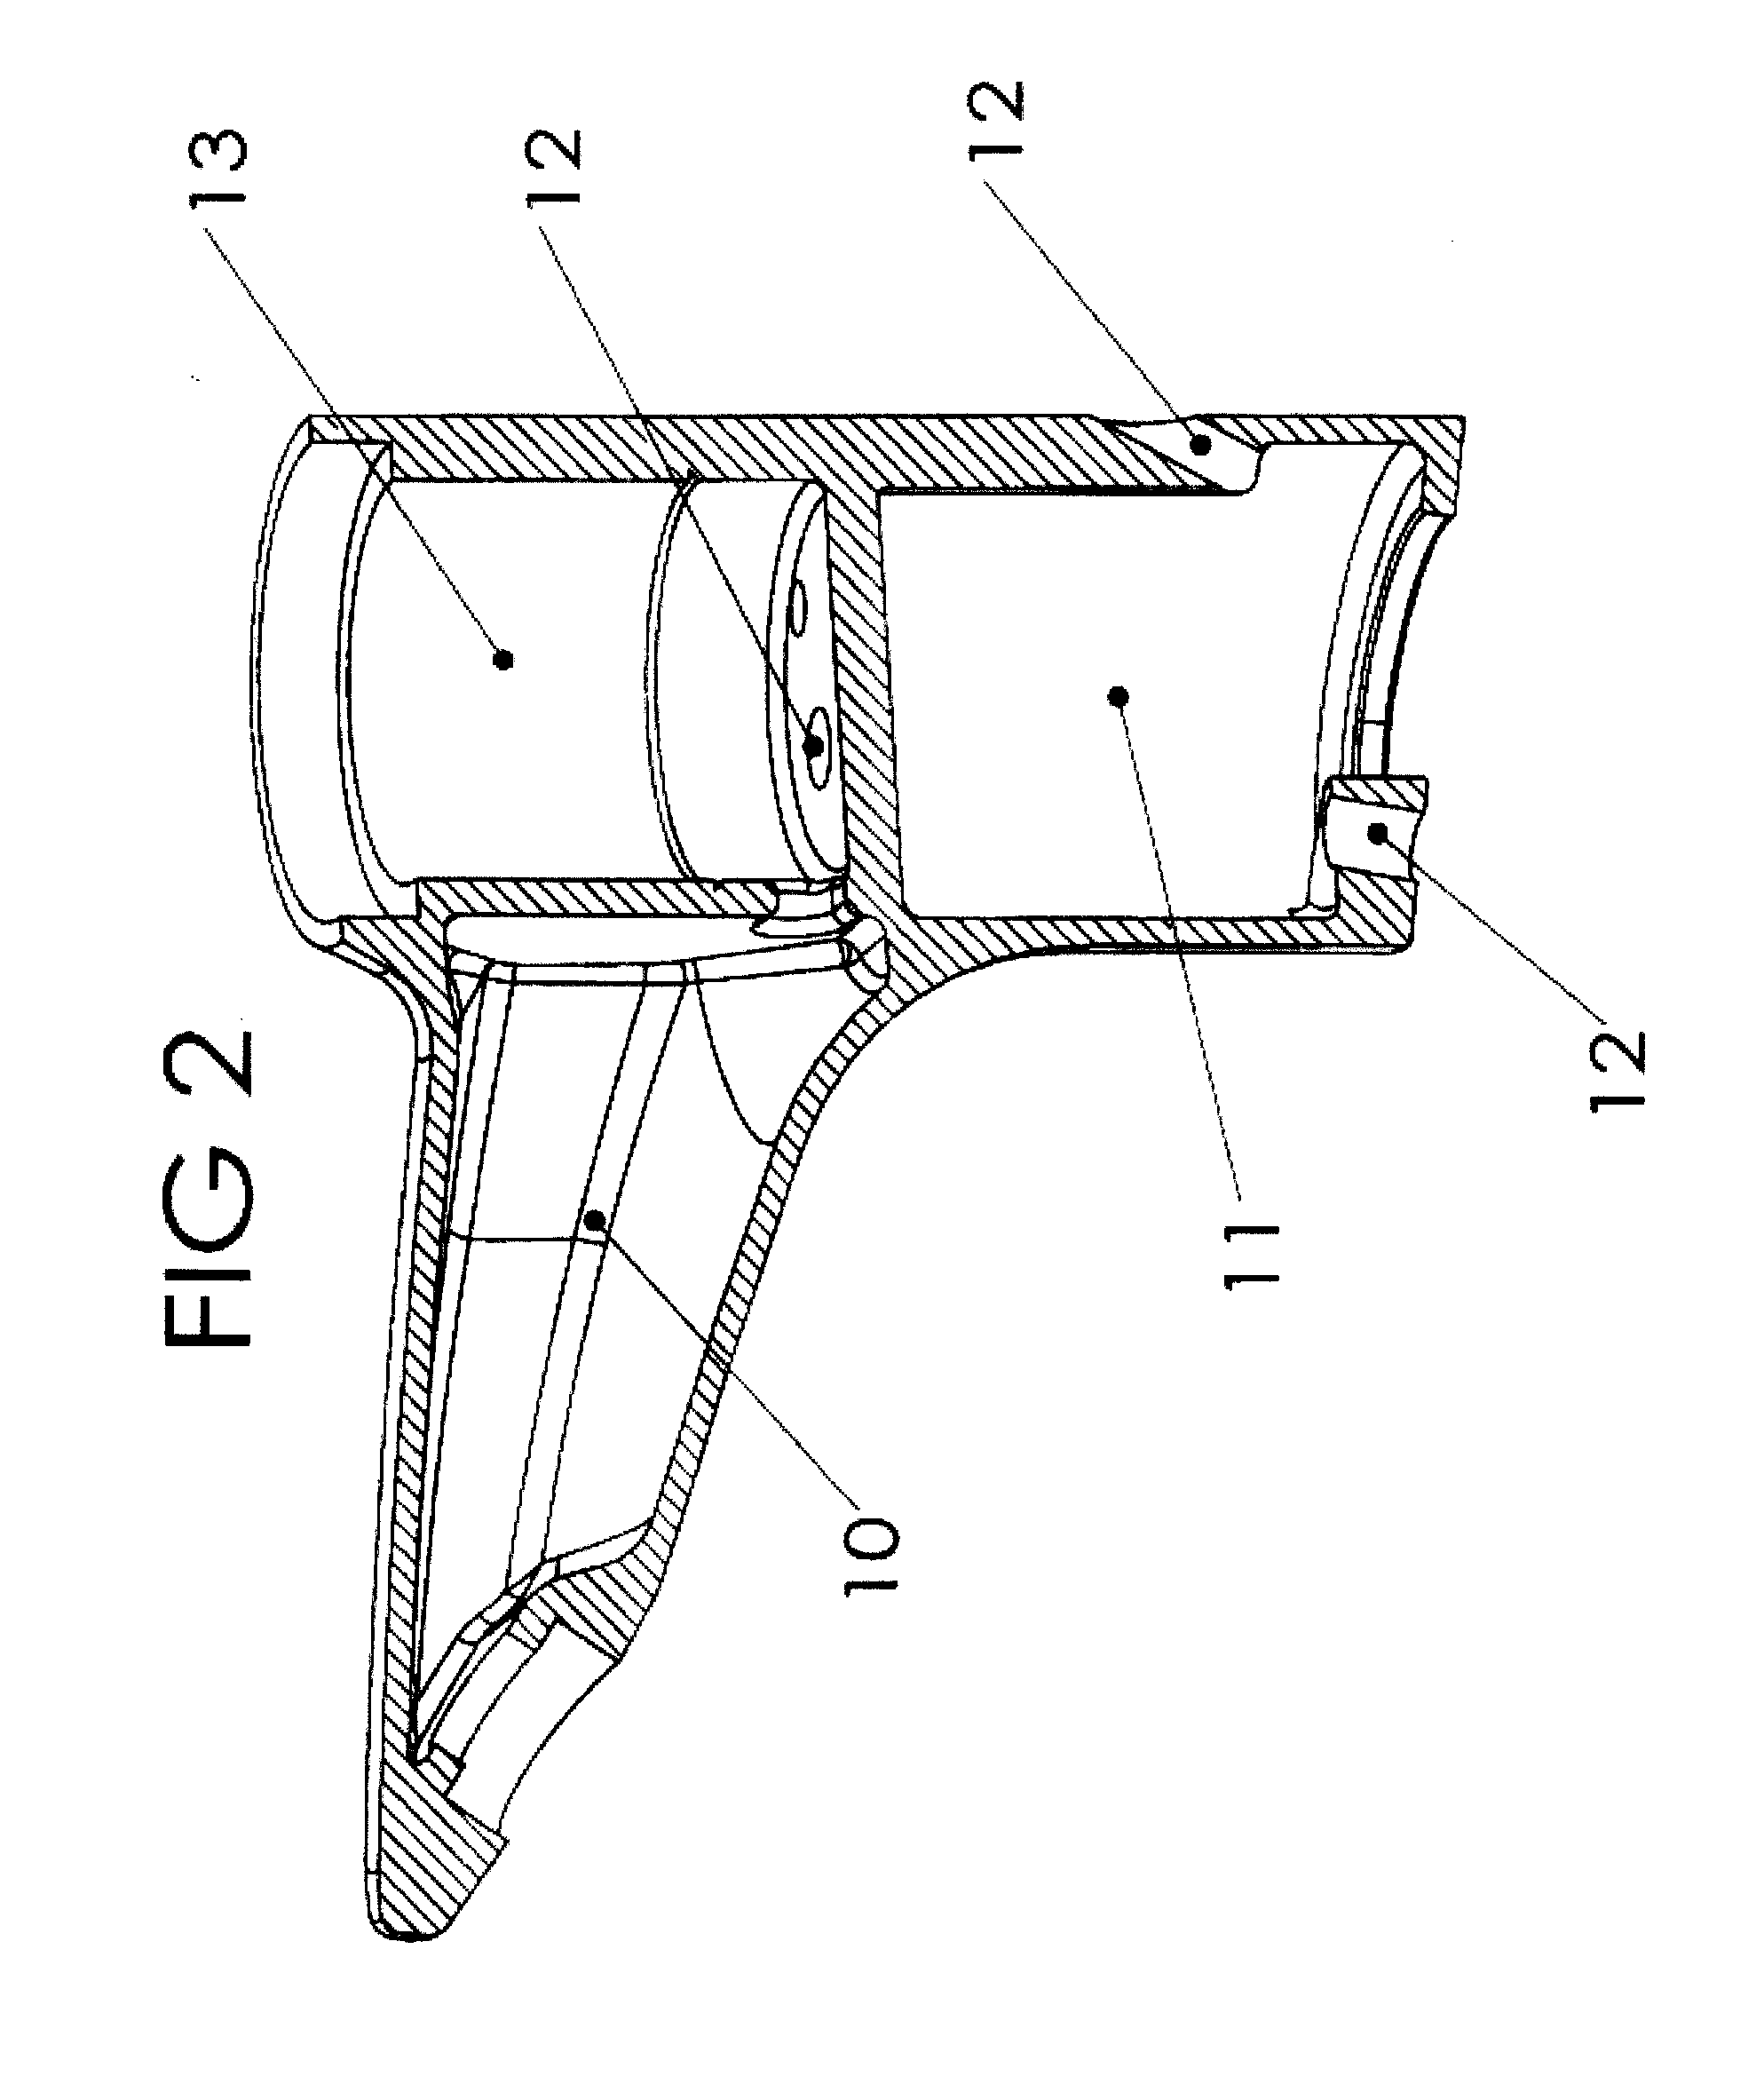 Methods and apparatus for manufacturing metal components with ceramic injection molding core structures